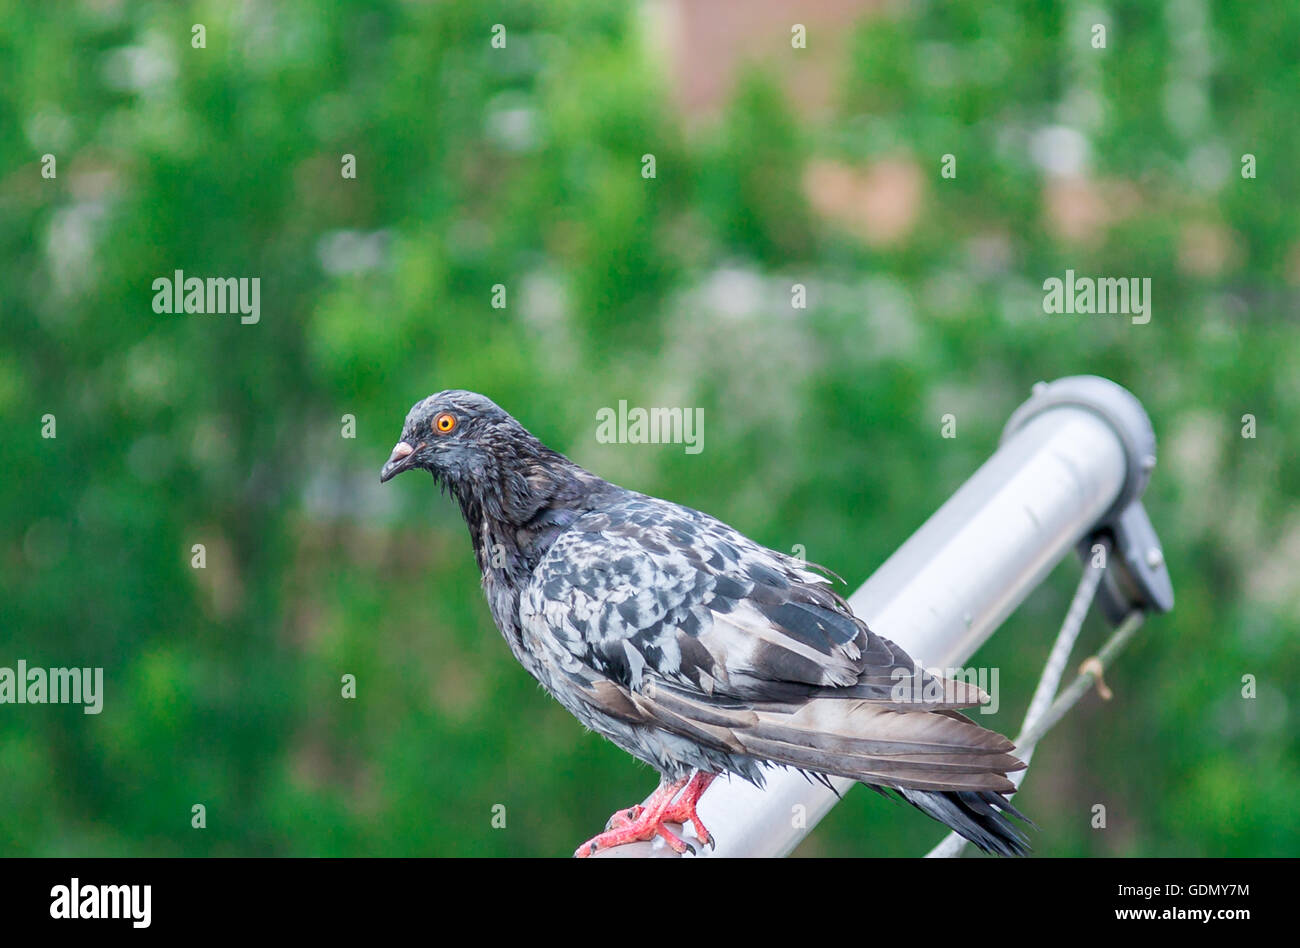 pigeon perched on an aluminum flag pole with trees in the background Stock Photo